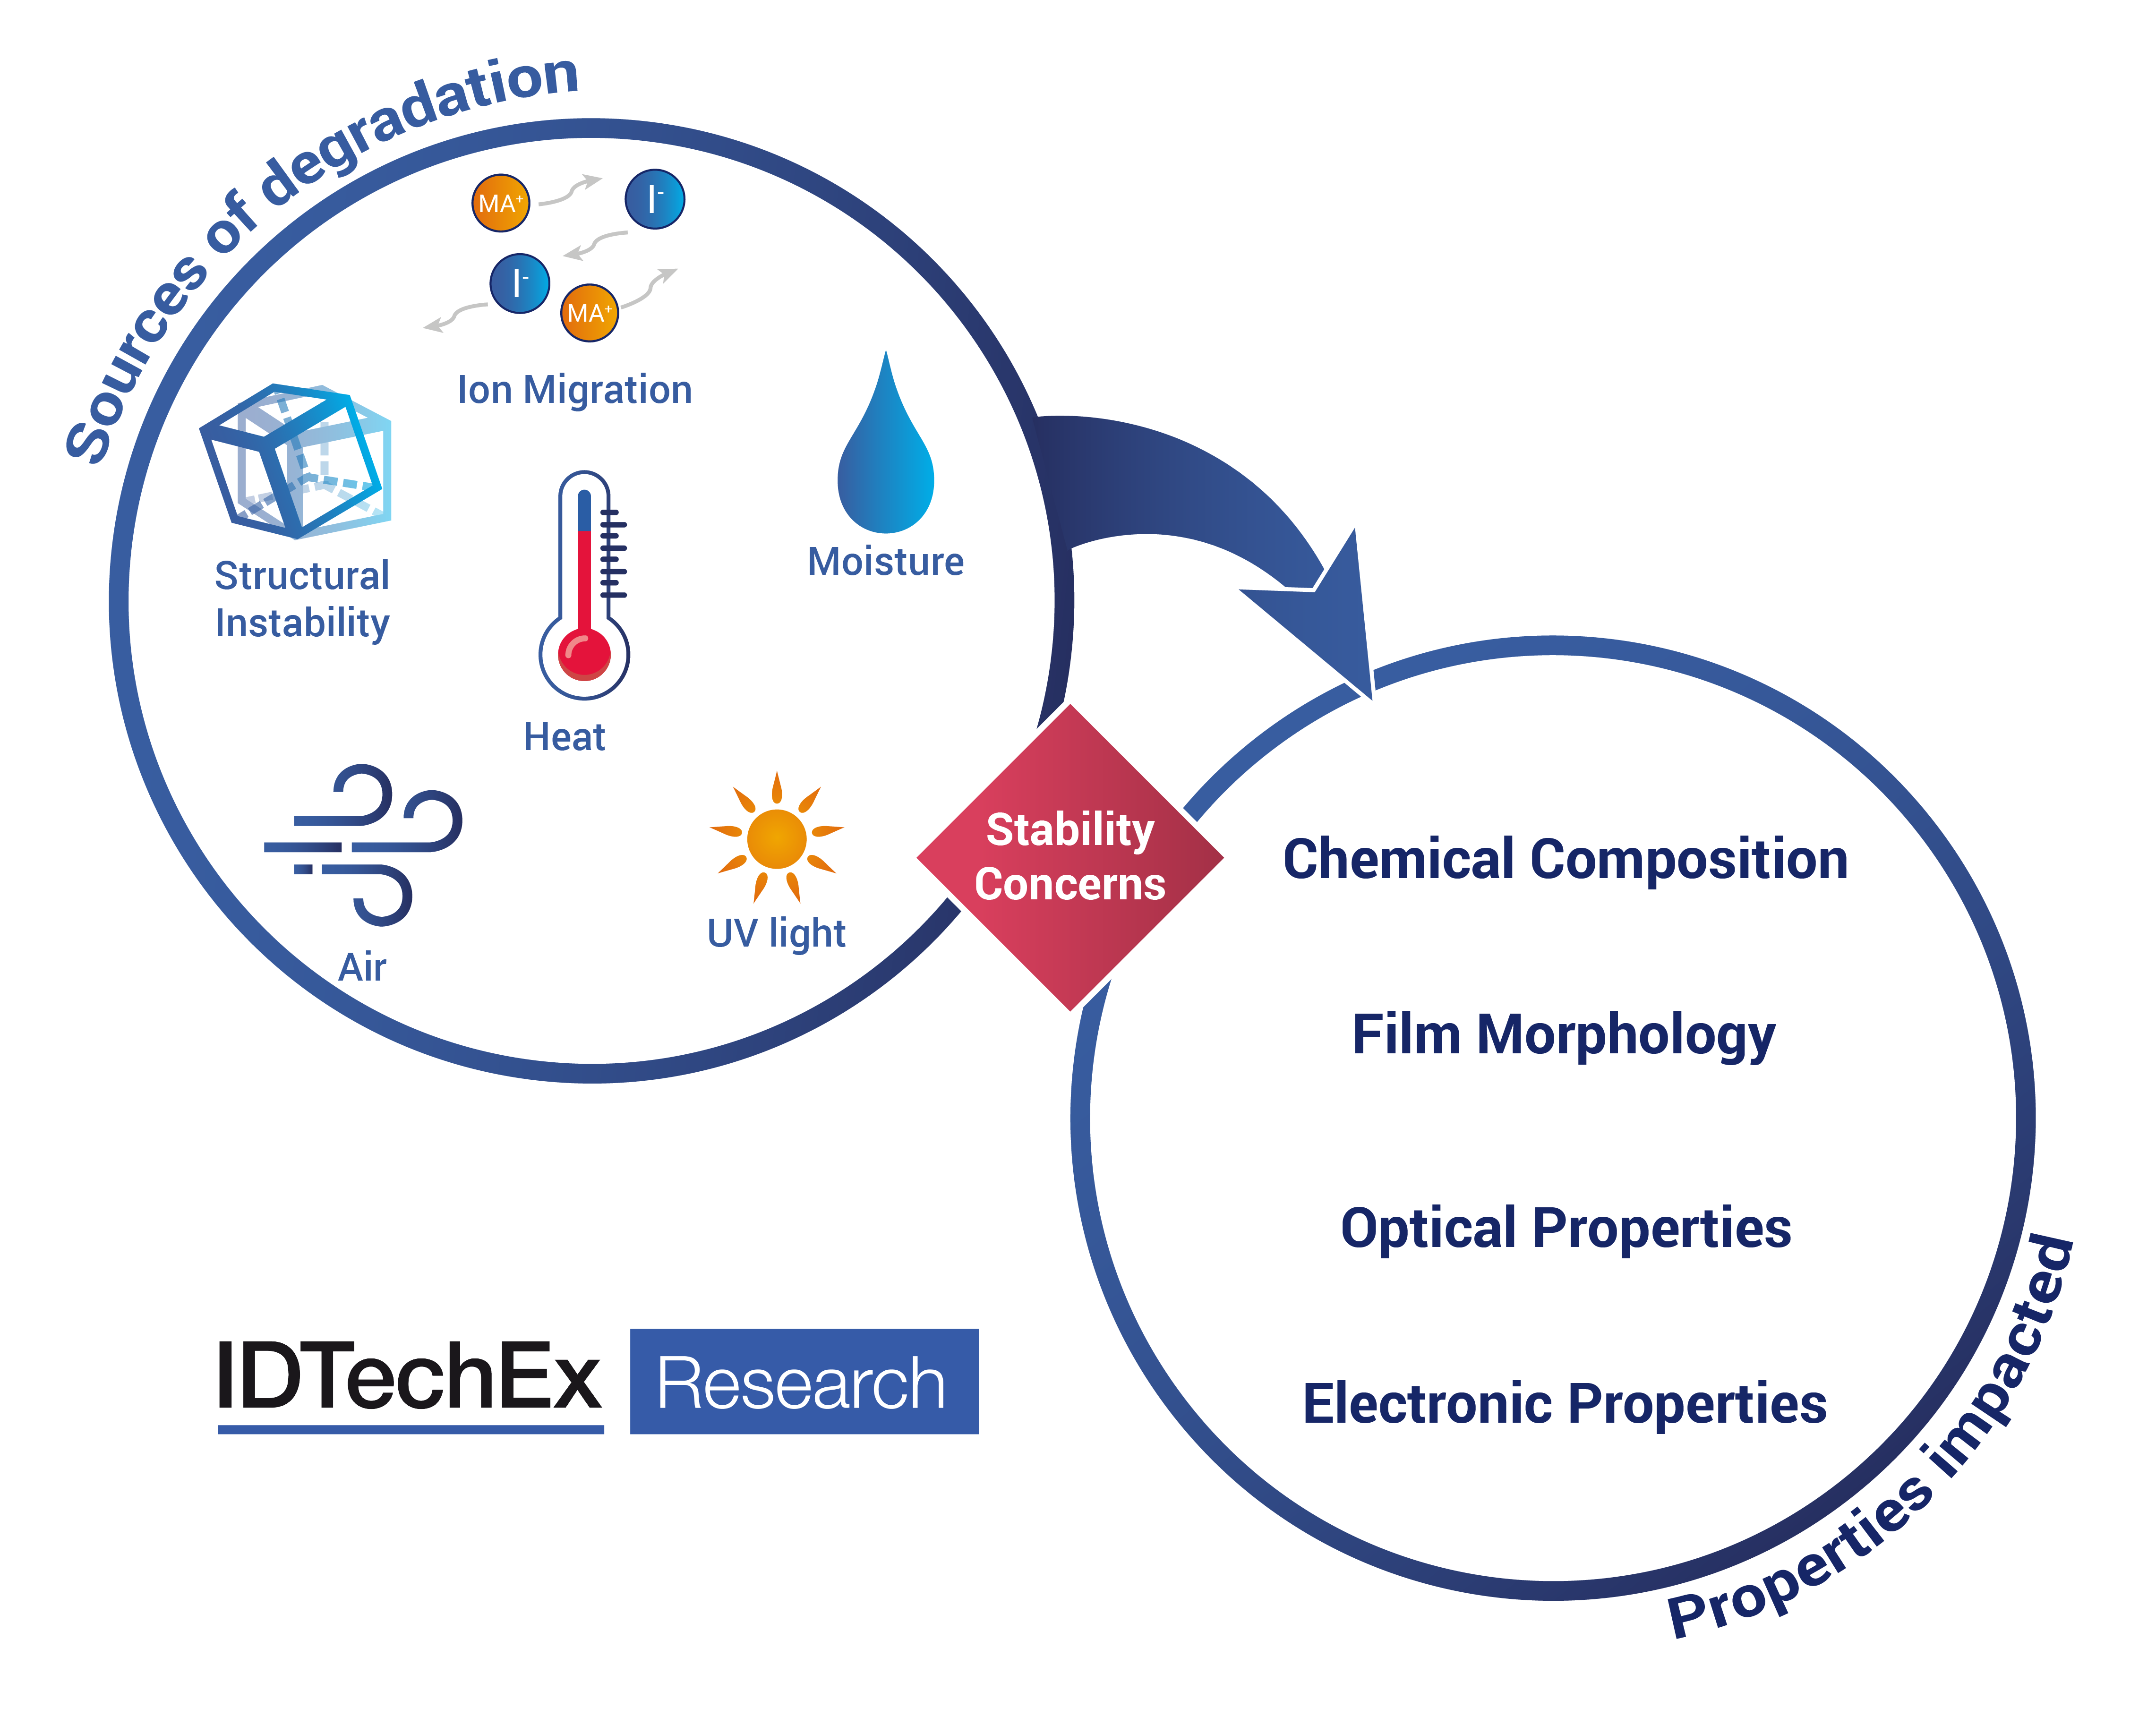 There exist numerous sources of instability within perovskite solar cells. Source: IDTechEx